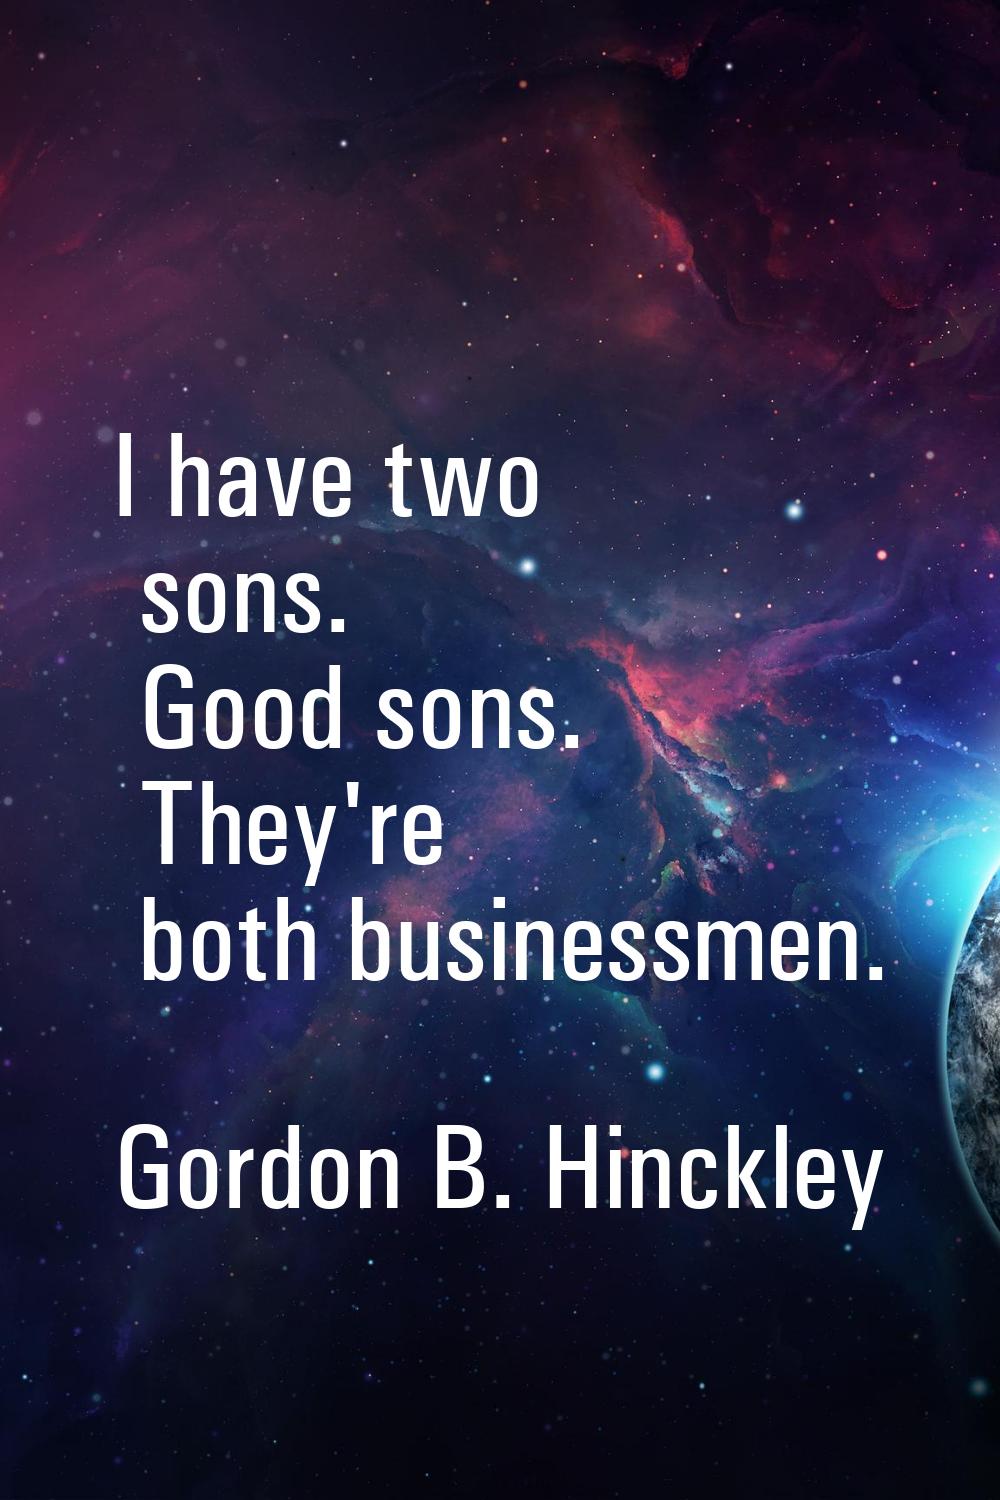 I have two sons. Good sons. They're both businessmen.